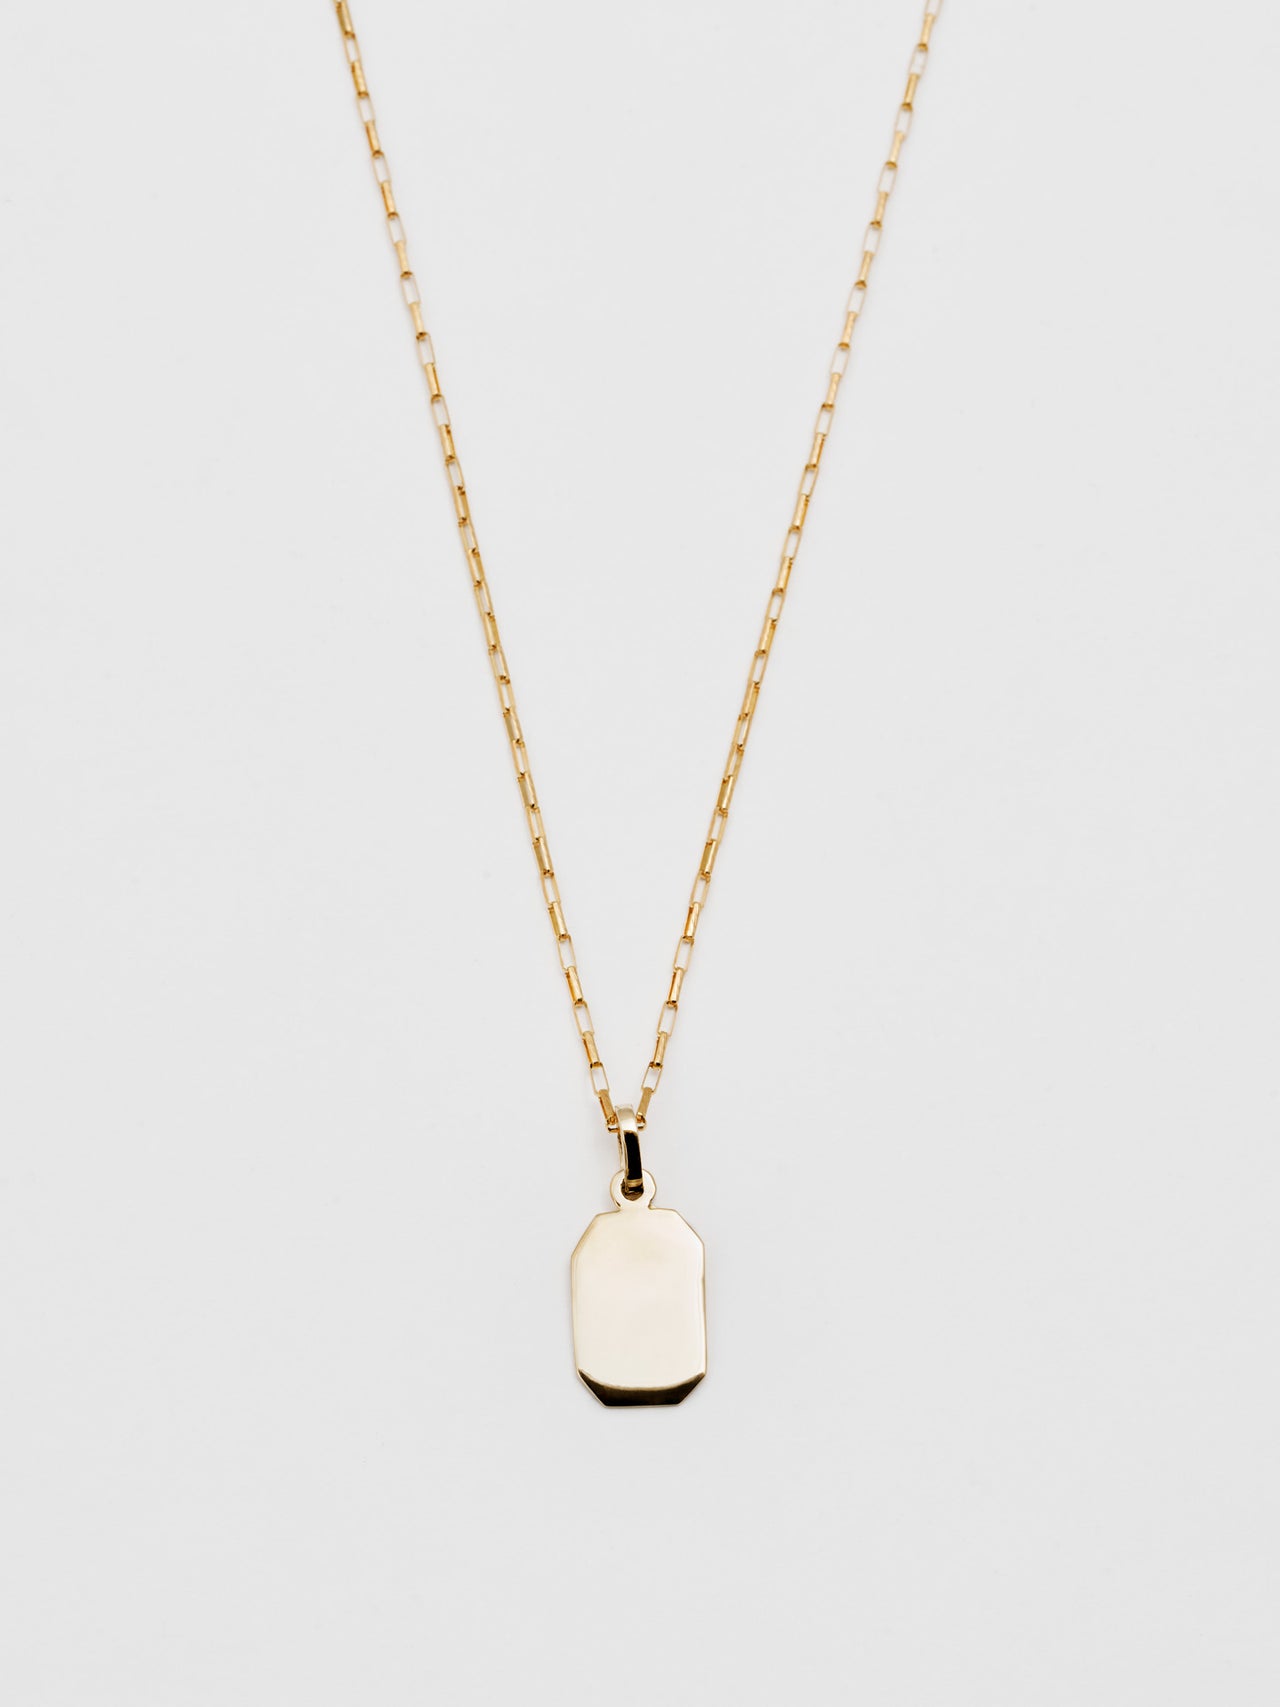 Close up of 14kt Octagonal Id Charm + Elongated Box Chain pictured on light grey background.